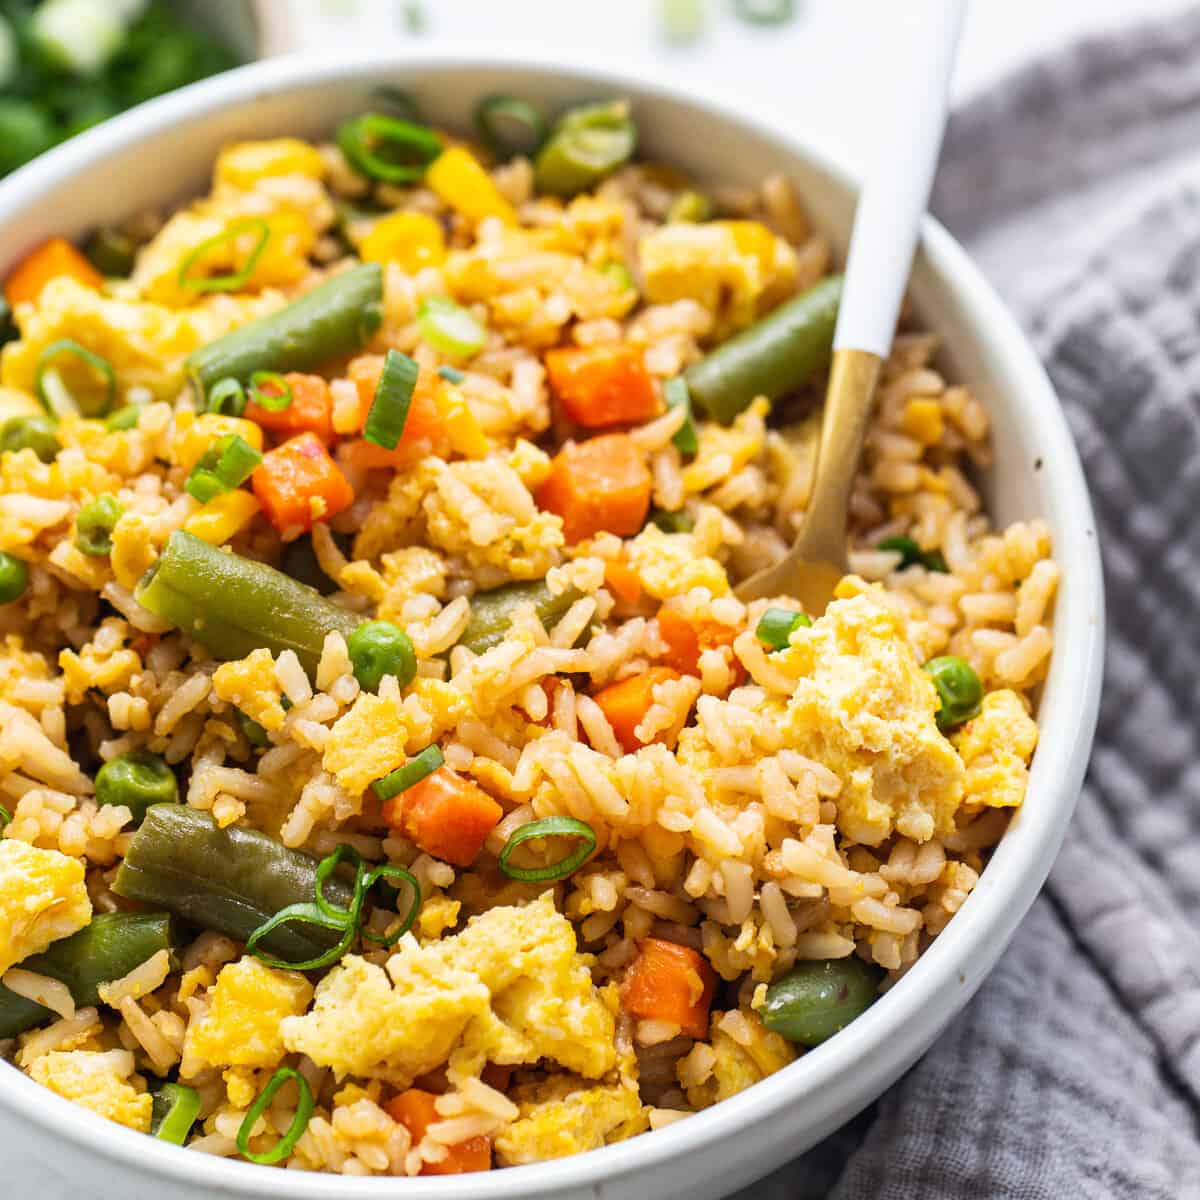 One Pot Rice Cooker Meal - The Foodie Takes Flight